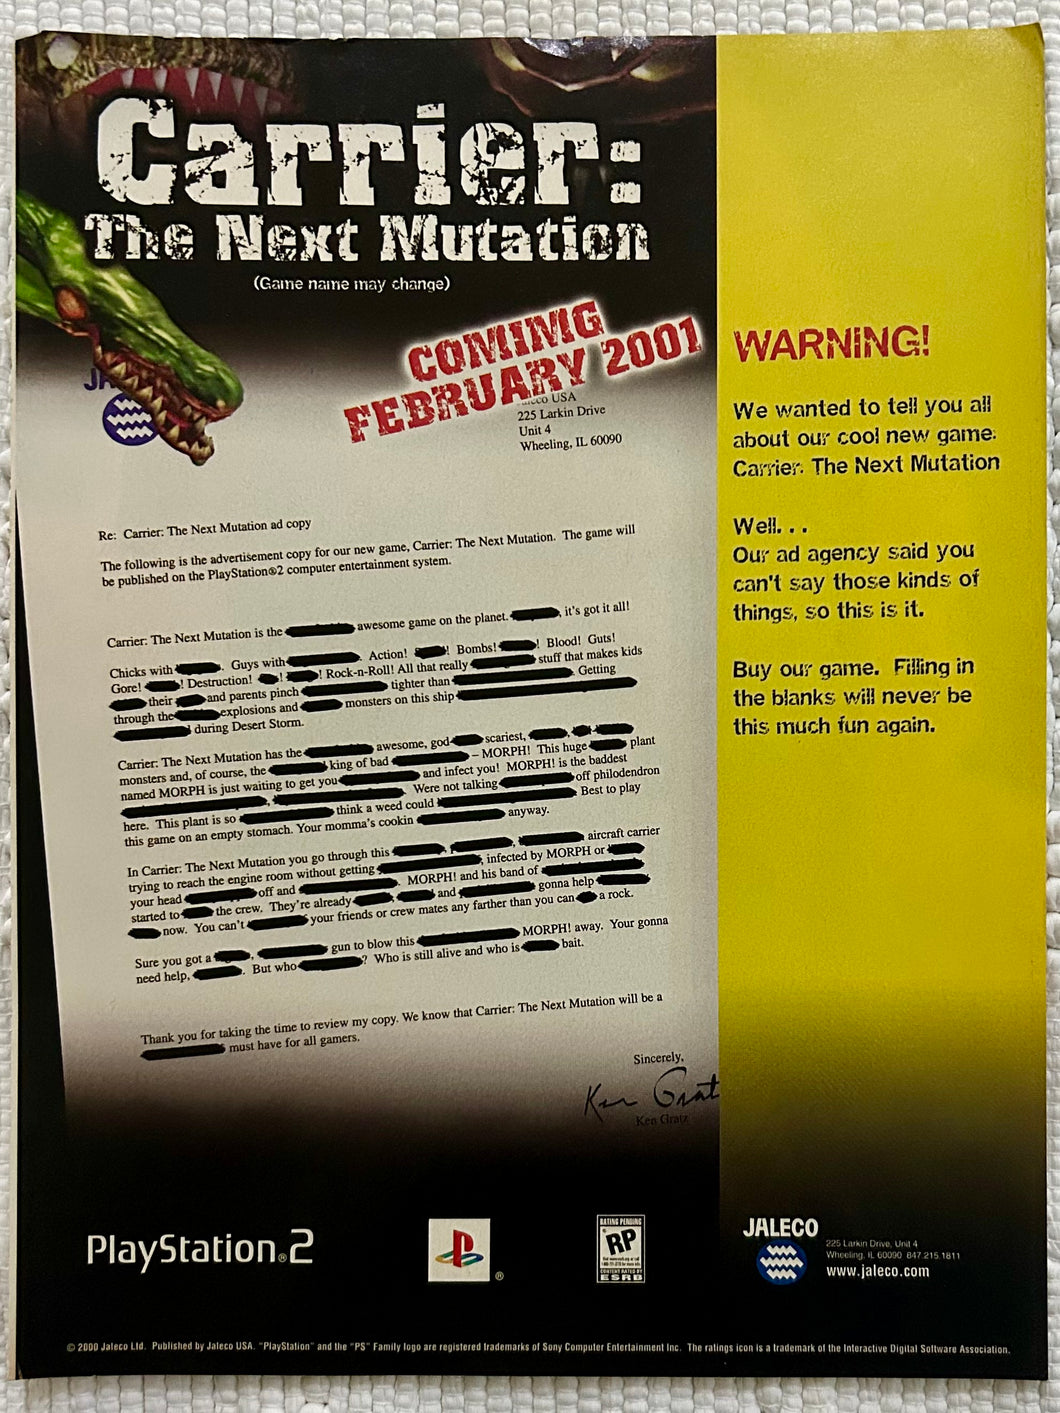 Carrier: The Next Mutation - PS2 - Original Vintage Advertisement - Print Ads - Laminated A4 Poster